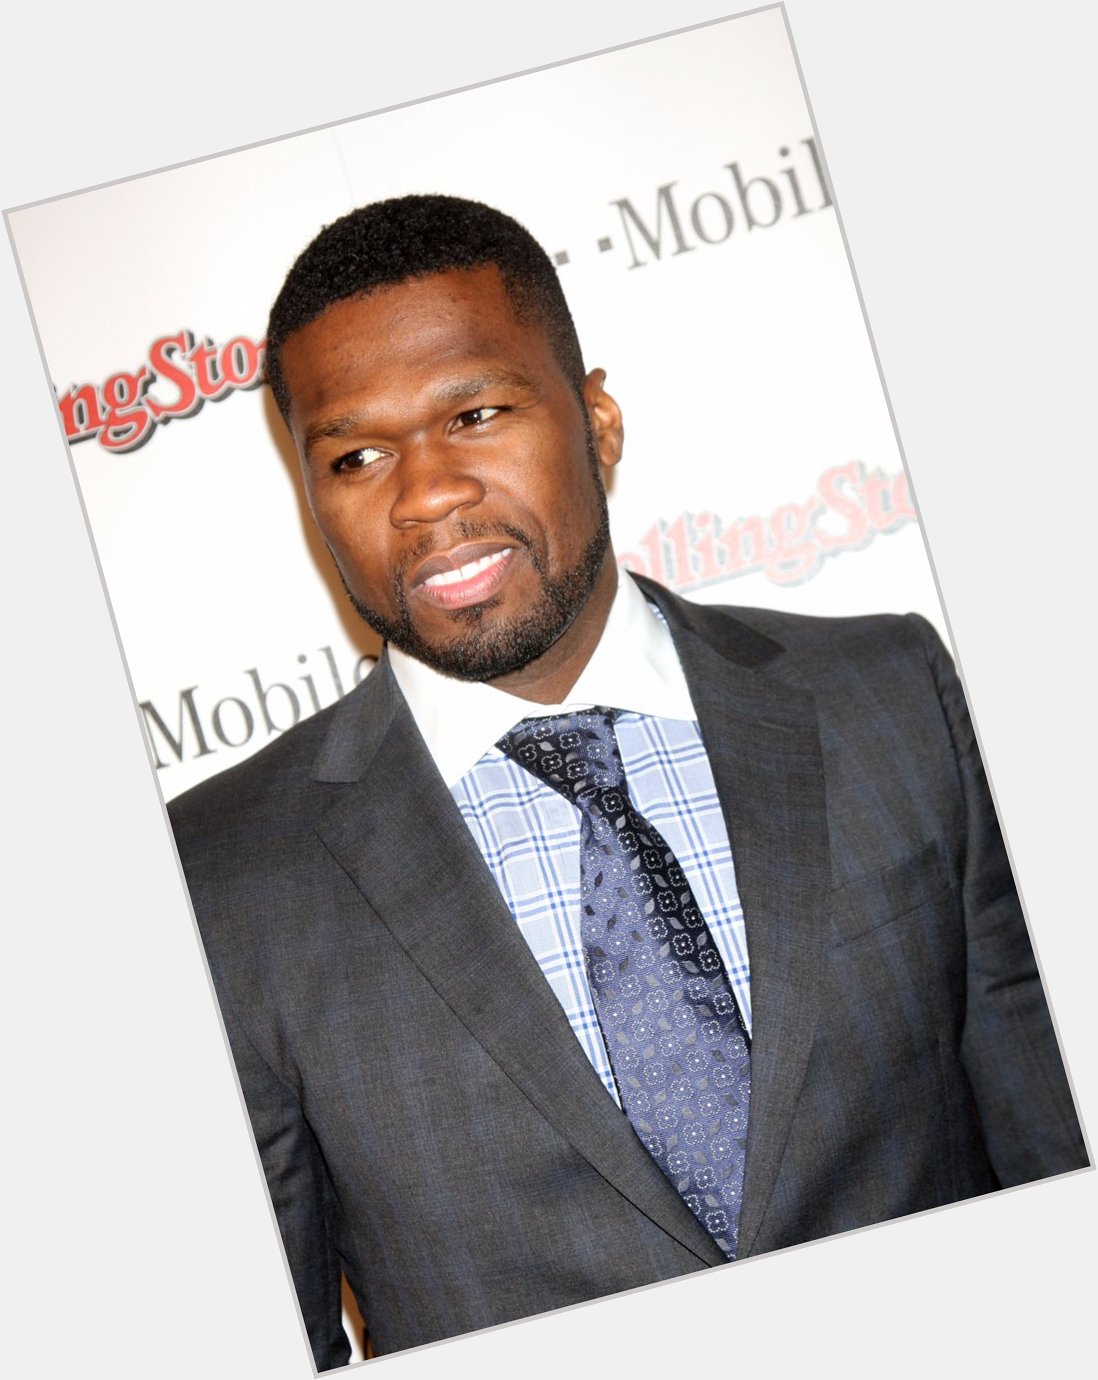 50 turns 42 today! Happy Birthday to Curtis James Jackson III, a.k.a. 50 Cent!
 